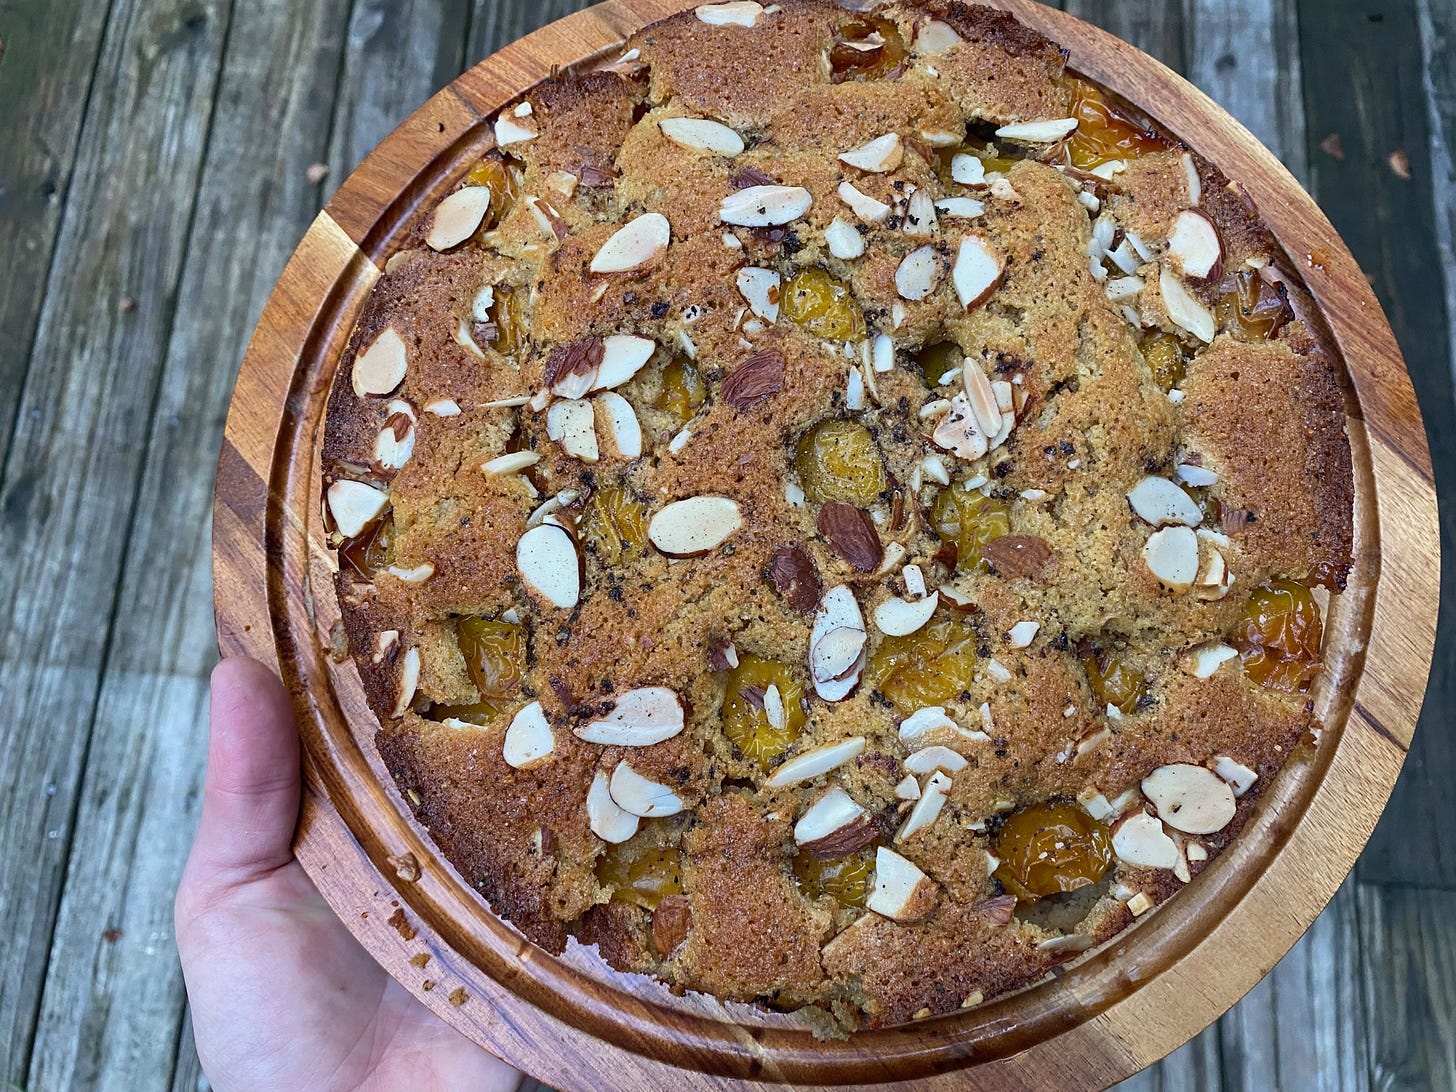 A round golden brown cake on a wooden platter. The top is studded with sliced almonds and small round golden plums.